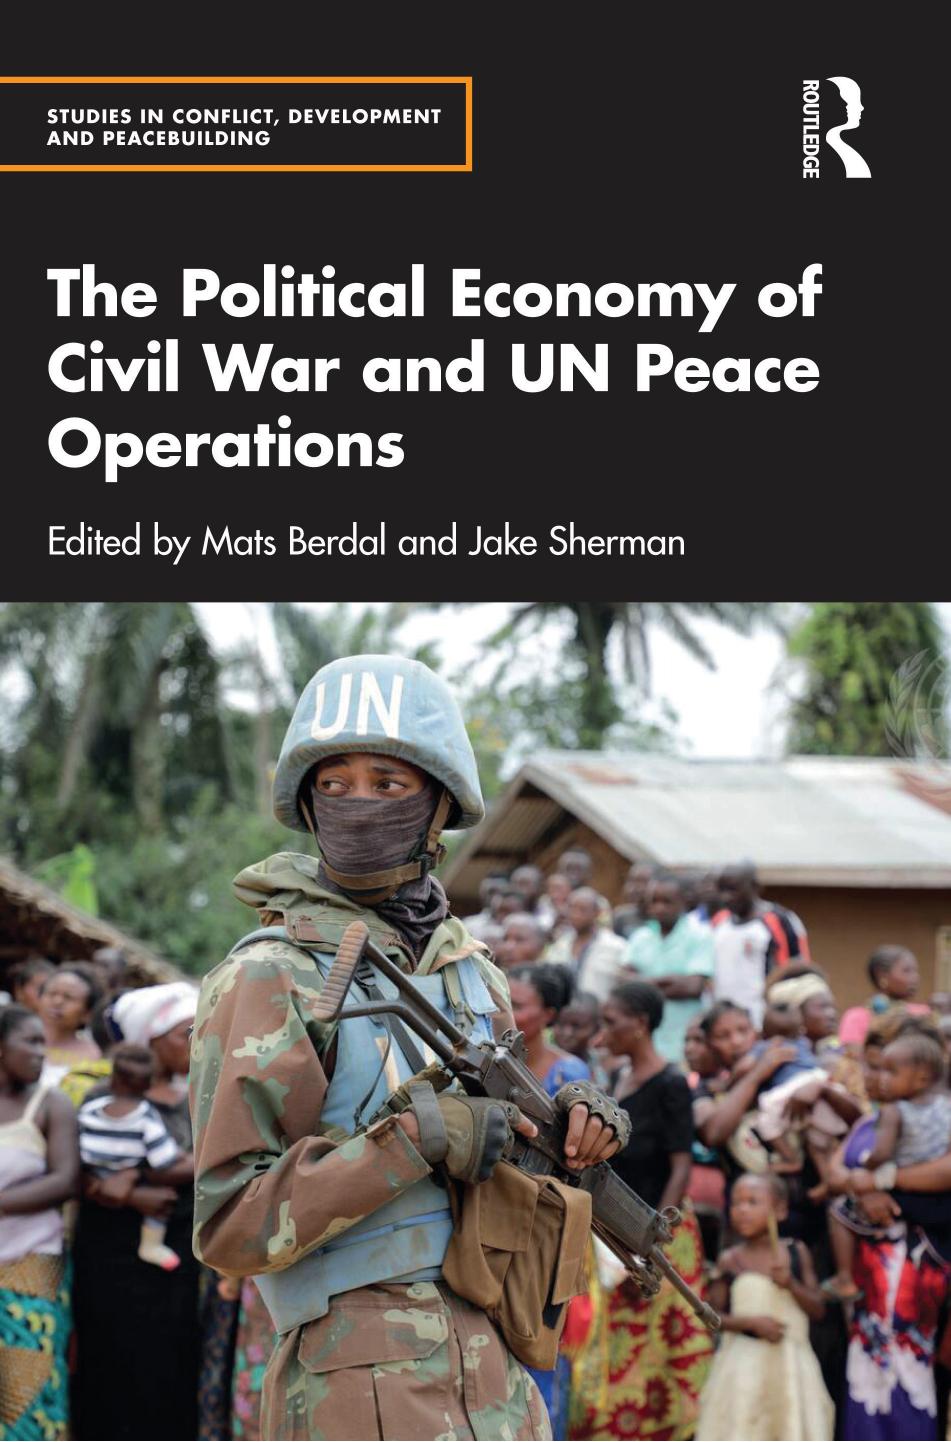 The Political Economy of Civil War and UN Peace Operations by Mats Berdal Jake Sherman